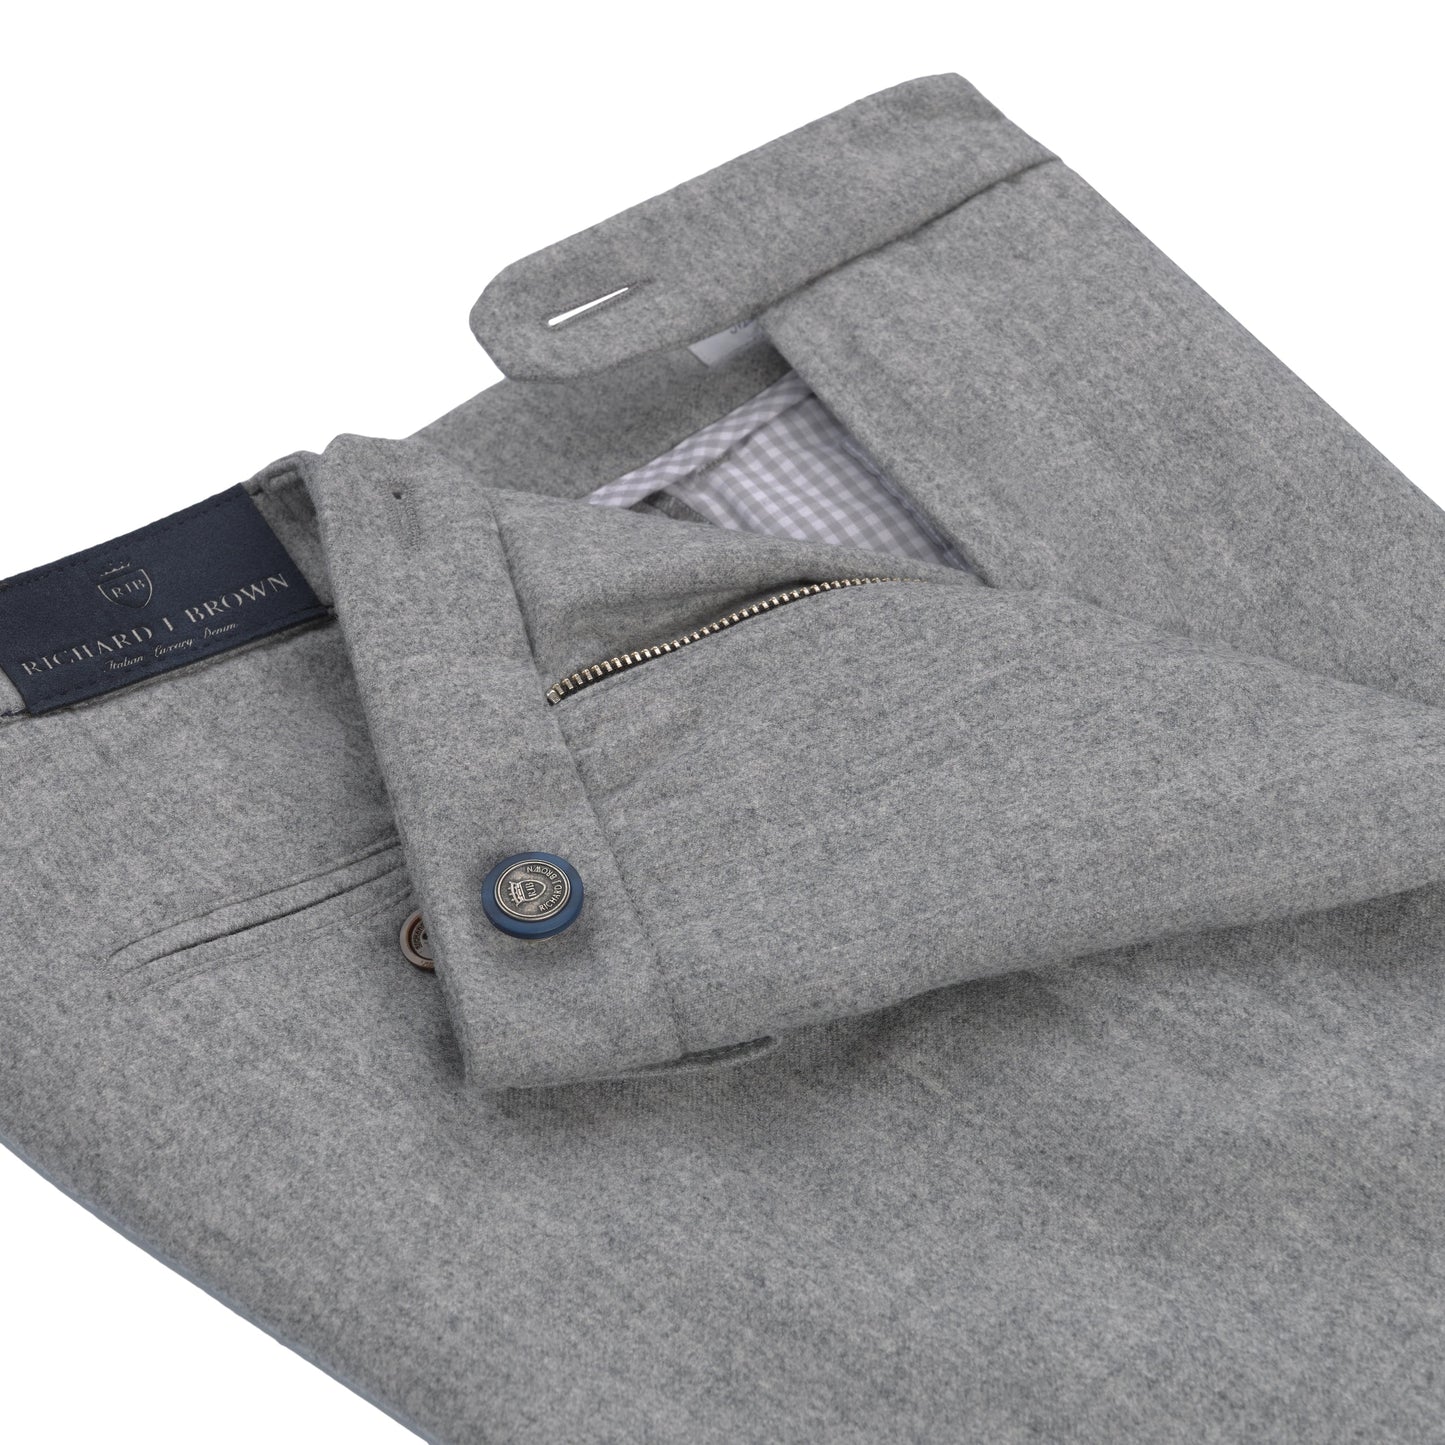 Richard J. Brown Wool and Cashmere Trousers in Grey Melange - SARTALE